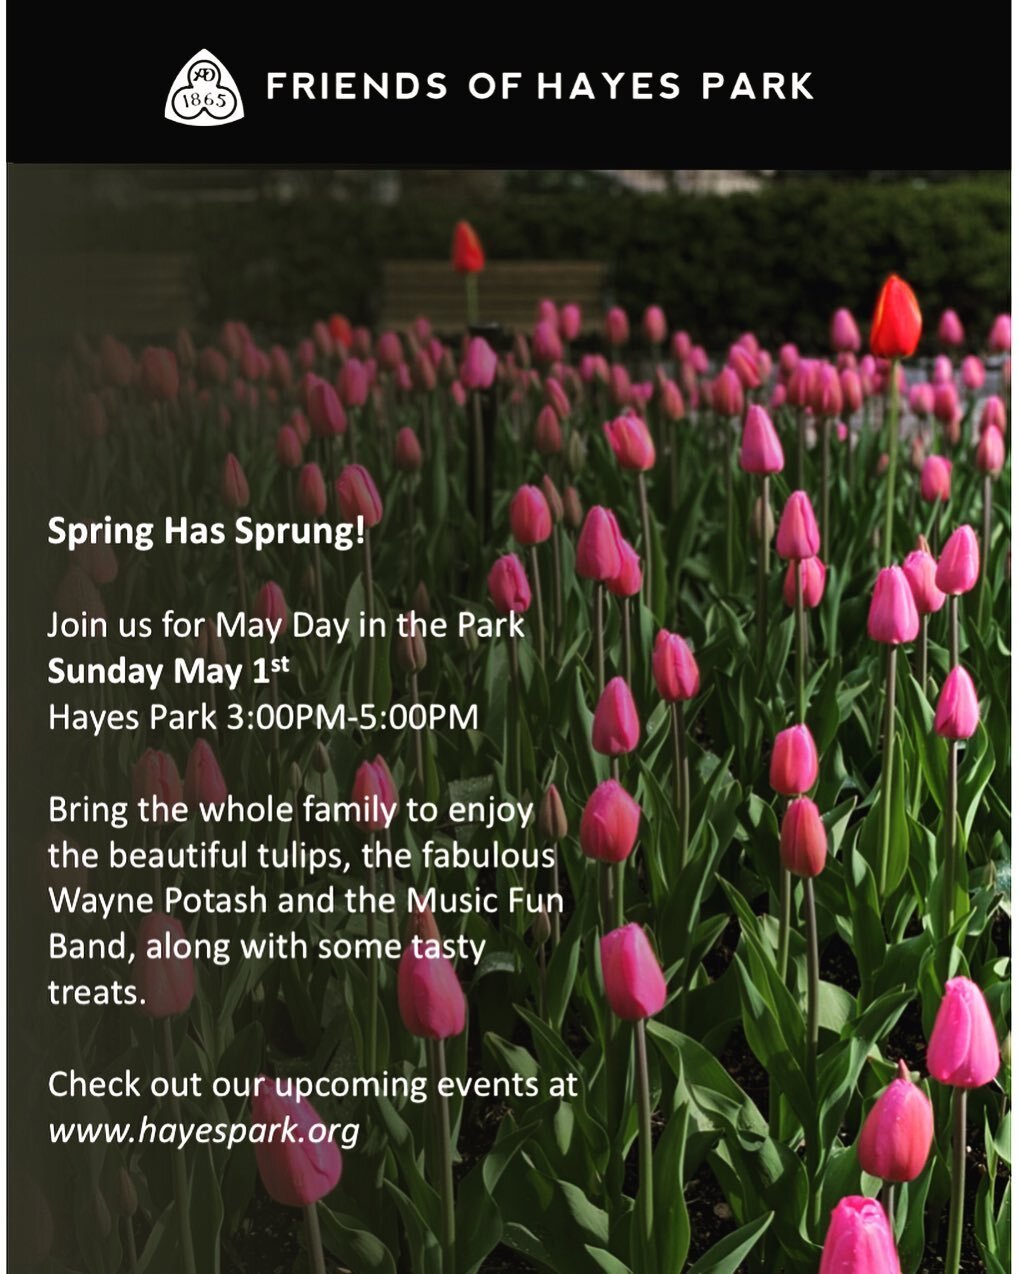 May Day! Join us this Sunday in our beautiful Hayes Park as we celebrate community and the arrival of spring 🌷! Bring the whole family and enjoy live music and sweet treats! See you there! 3:00-5:00pm. #hayespark #southend #springflowers #mayday